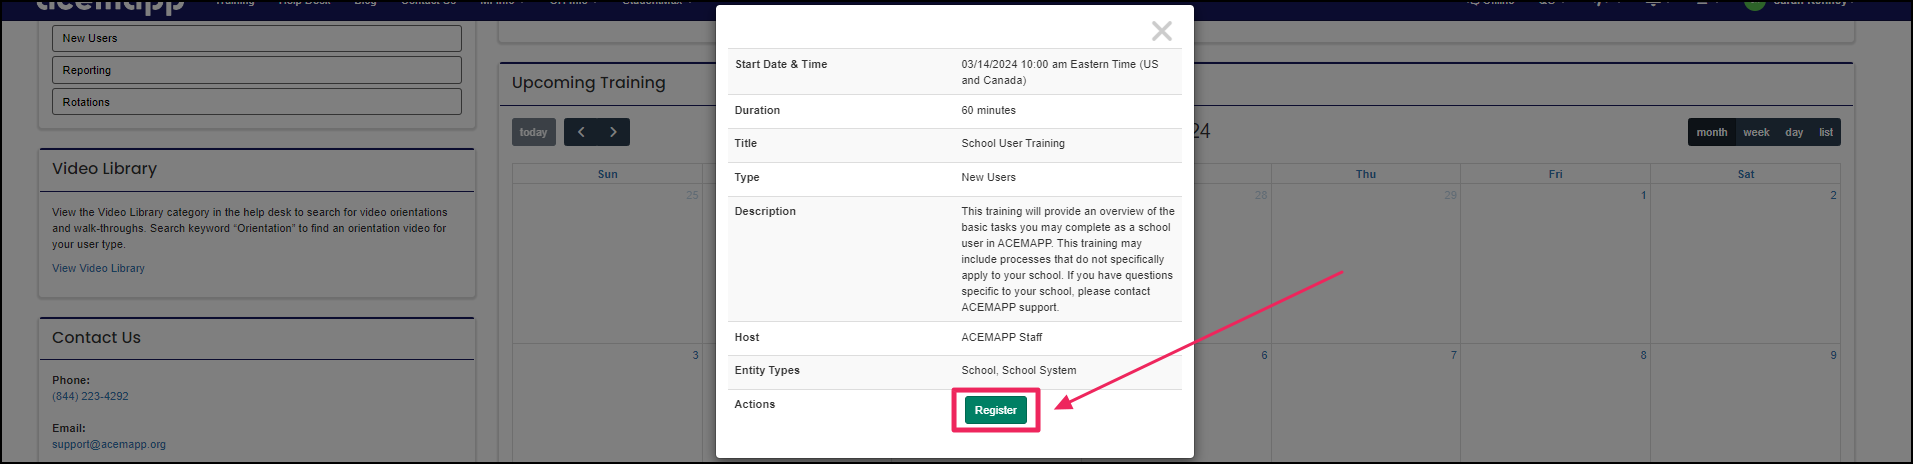 Training information and green register button